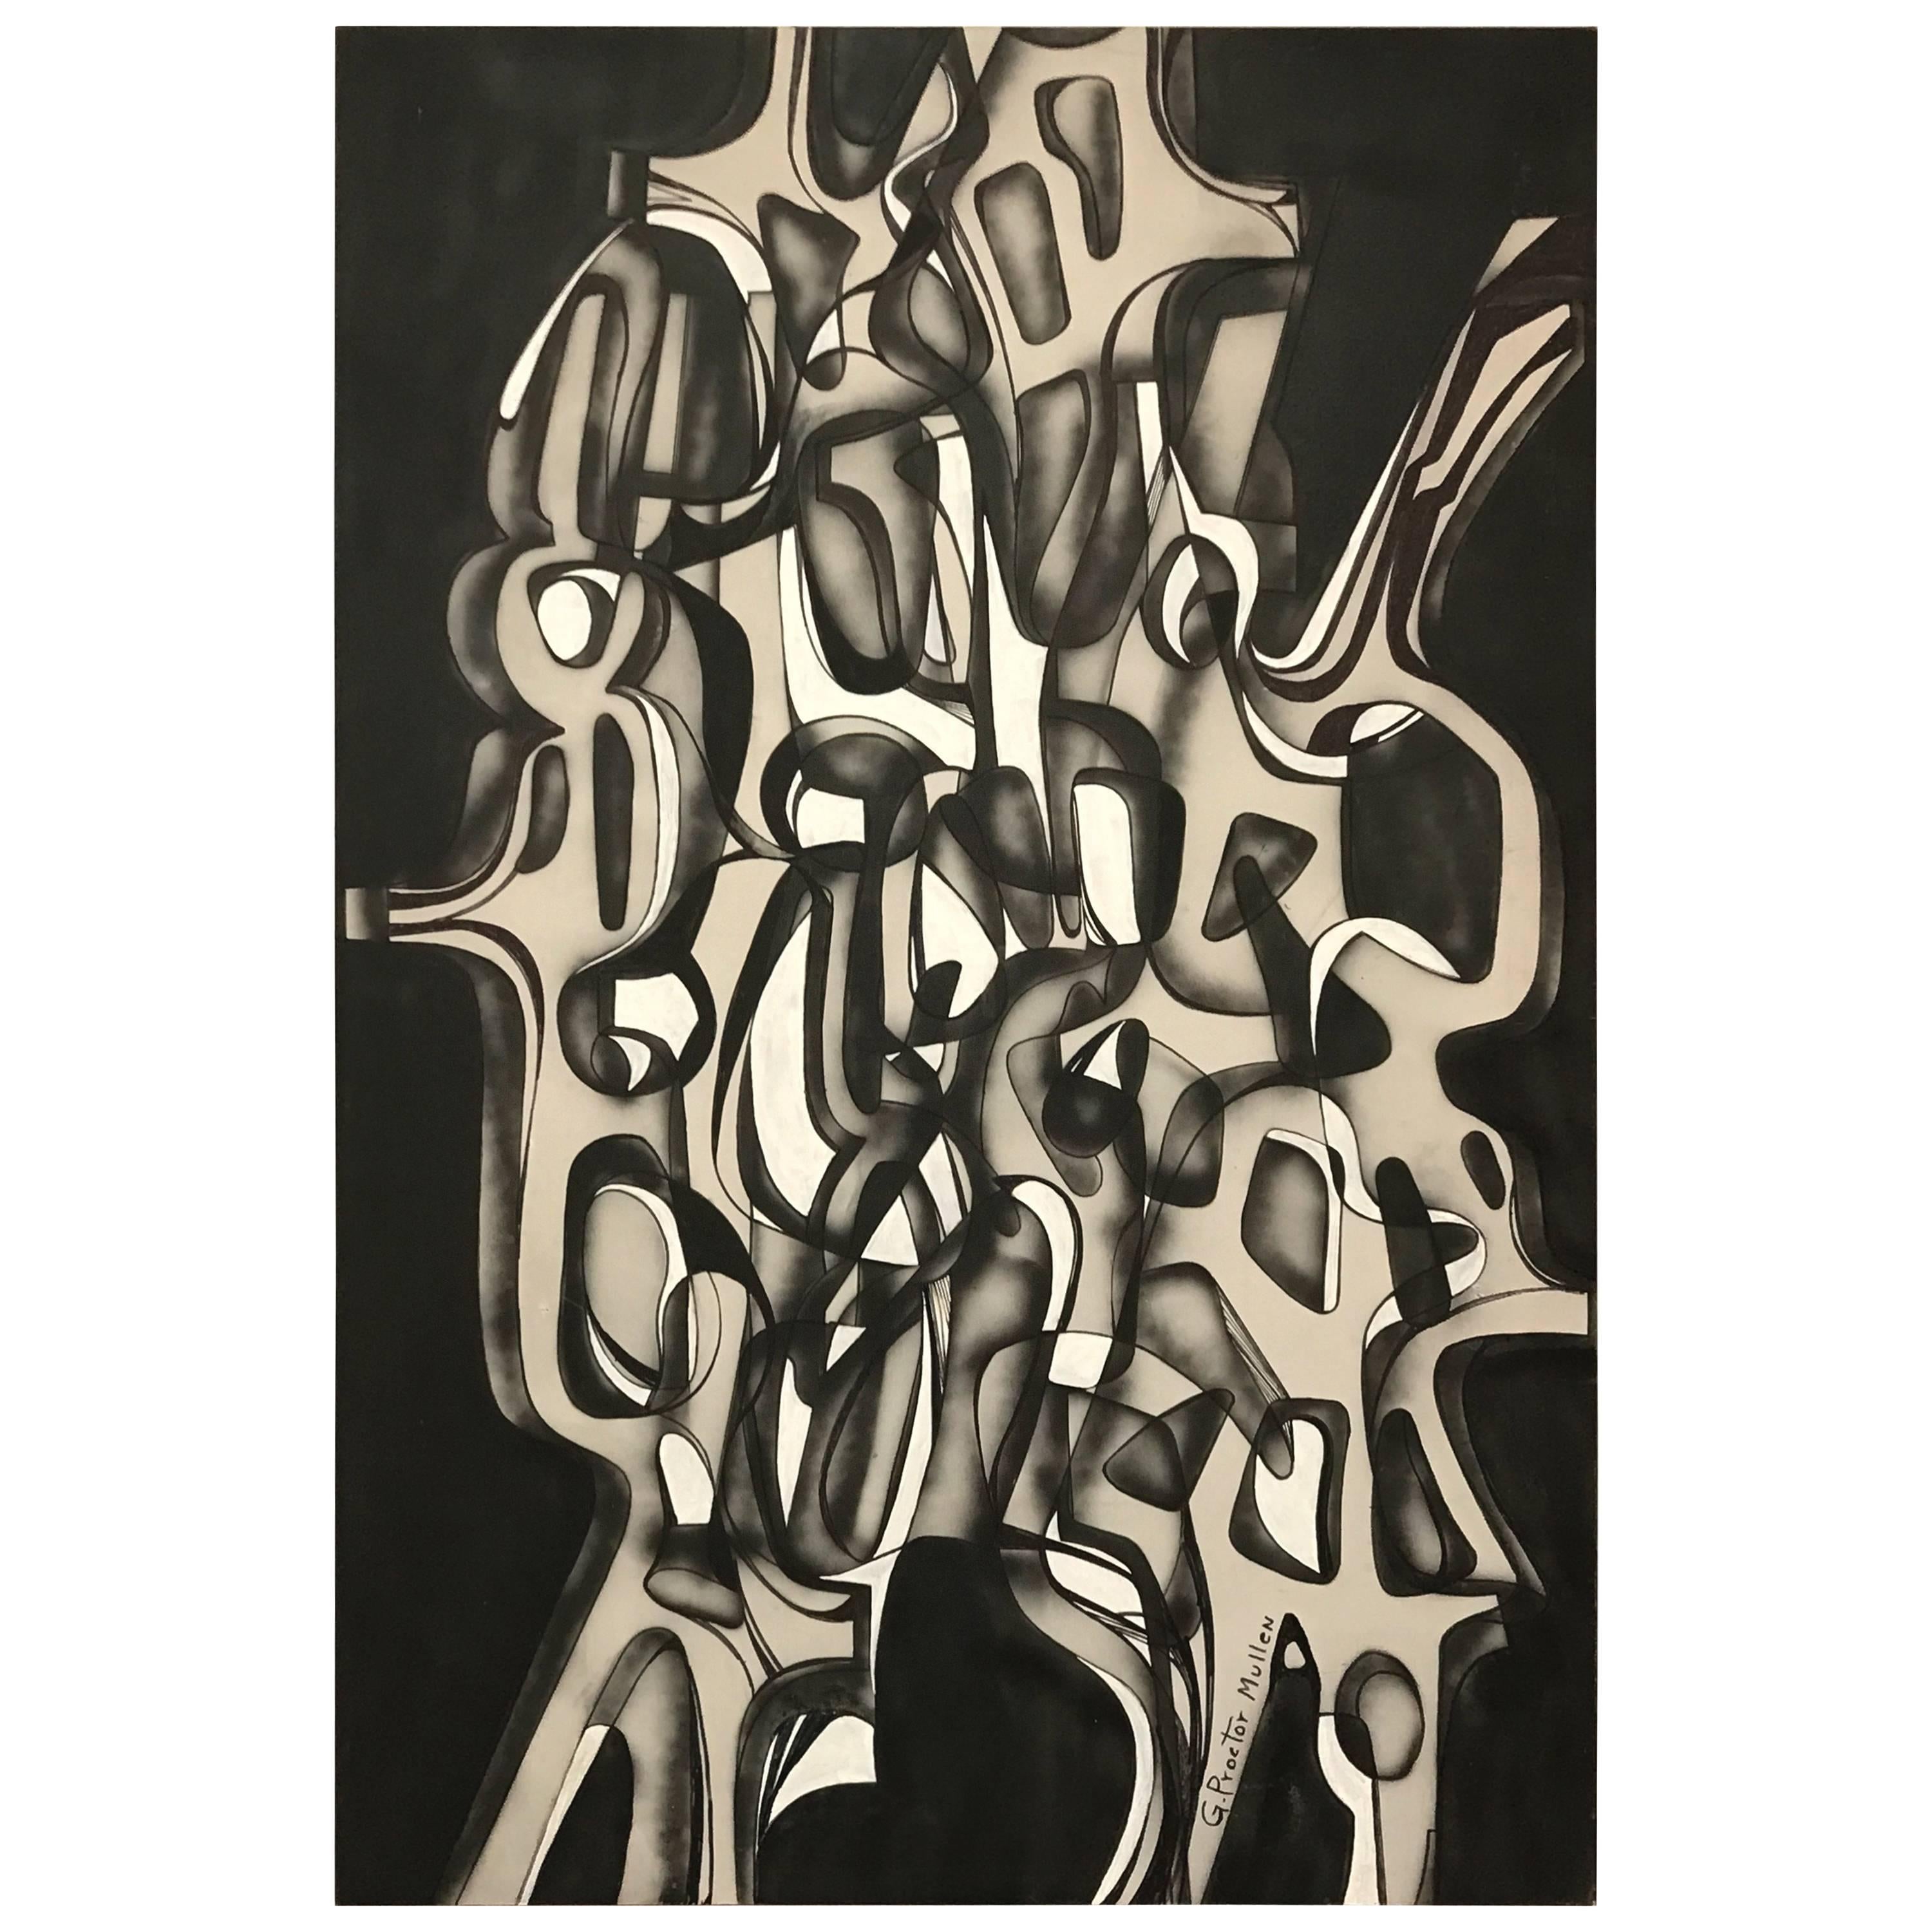 Black and White Abstract Acrylic on Canvas Painting by George Mullen